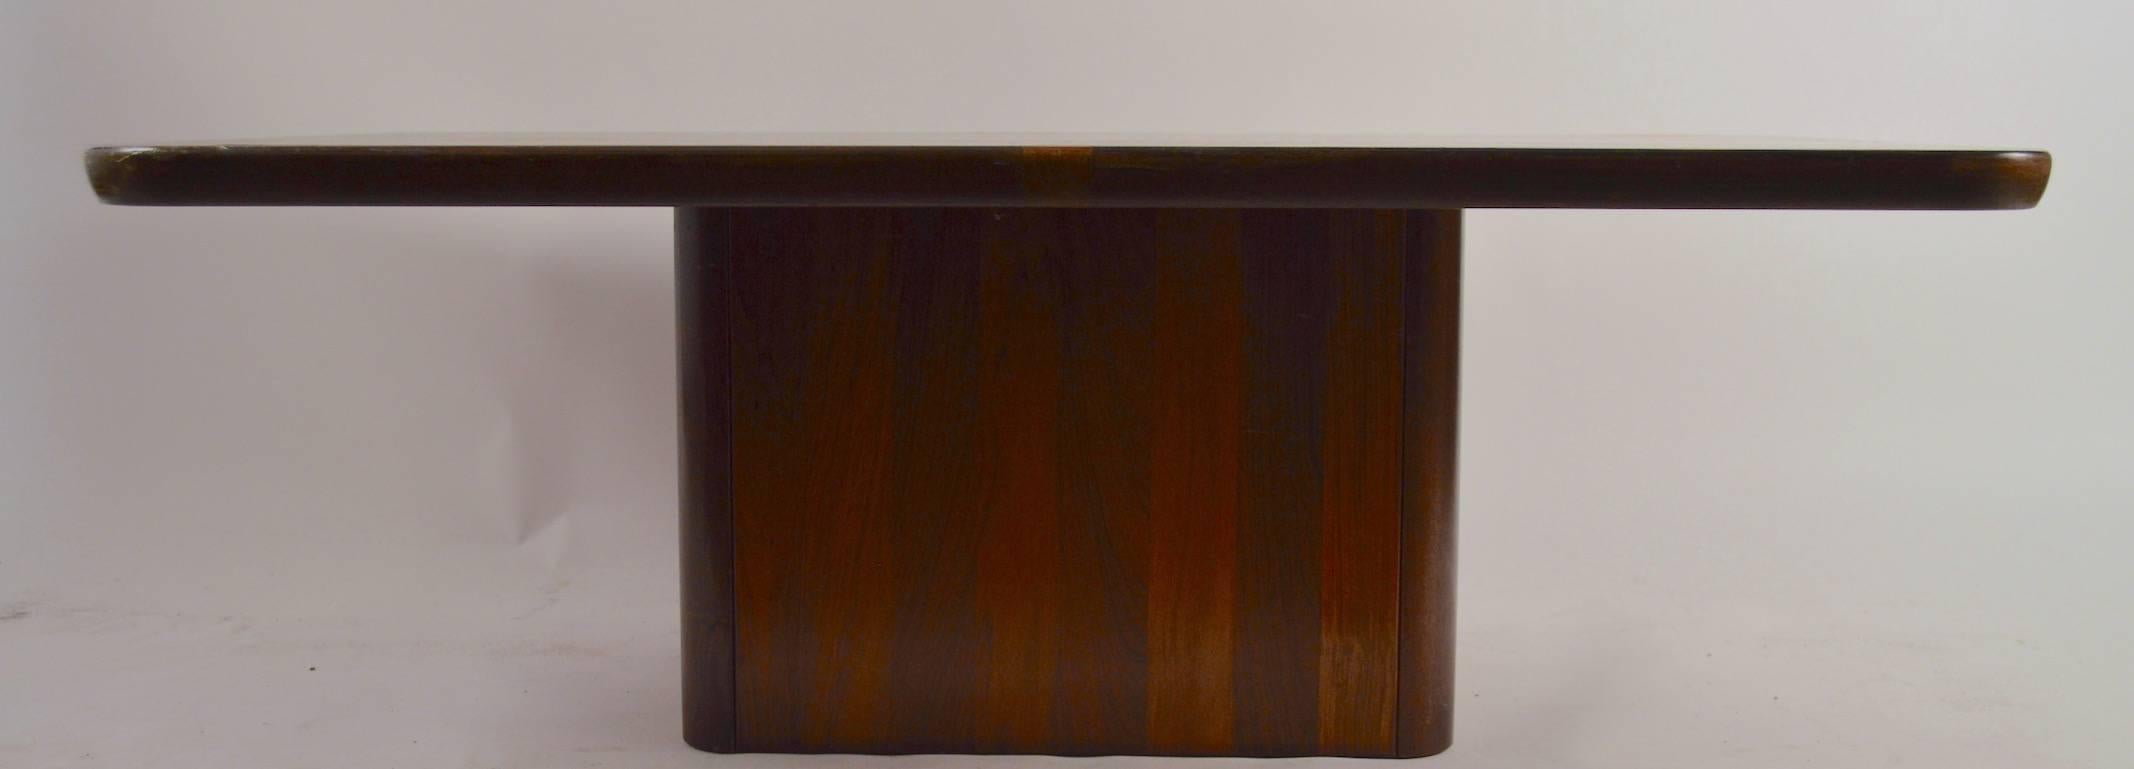 Mod rosewood coffee table by Jensen Frokjaeras. This example shows some cosmetic wear, normal and consistent with age. Top 1.5